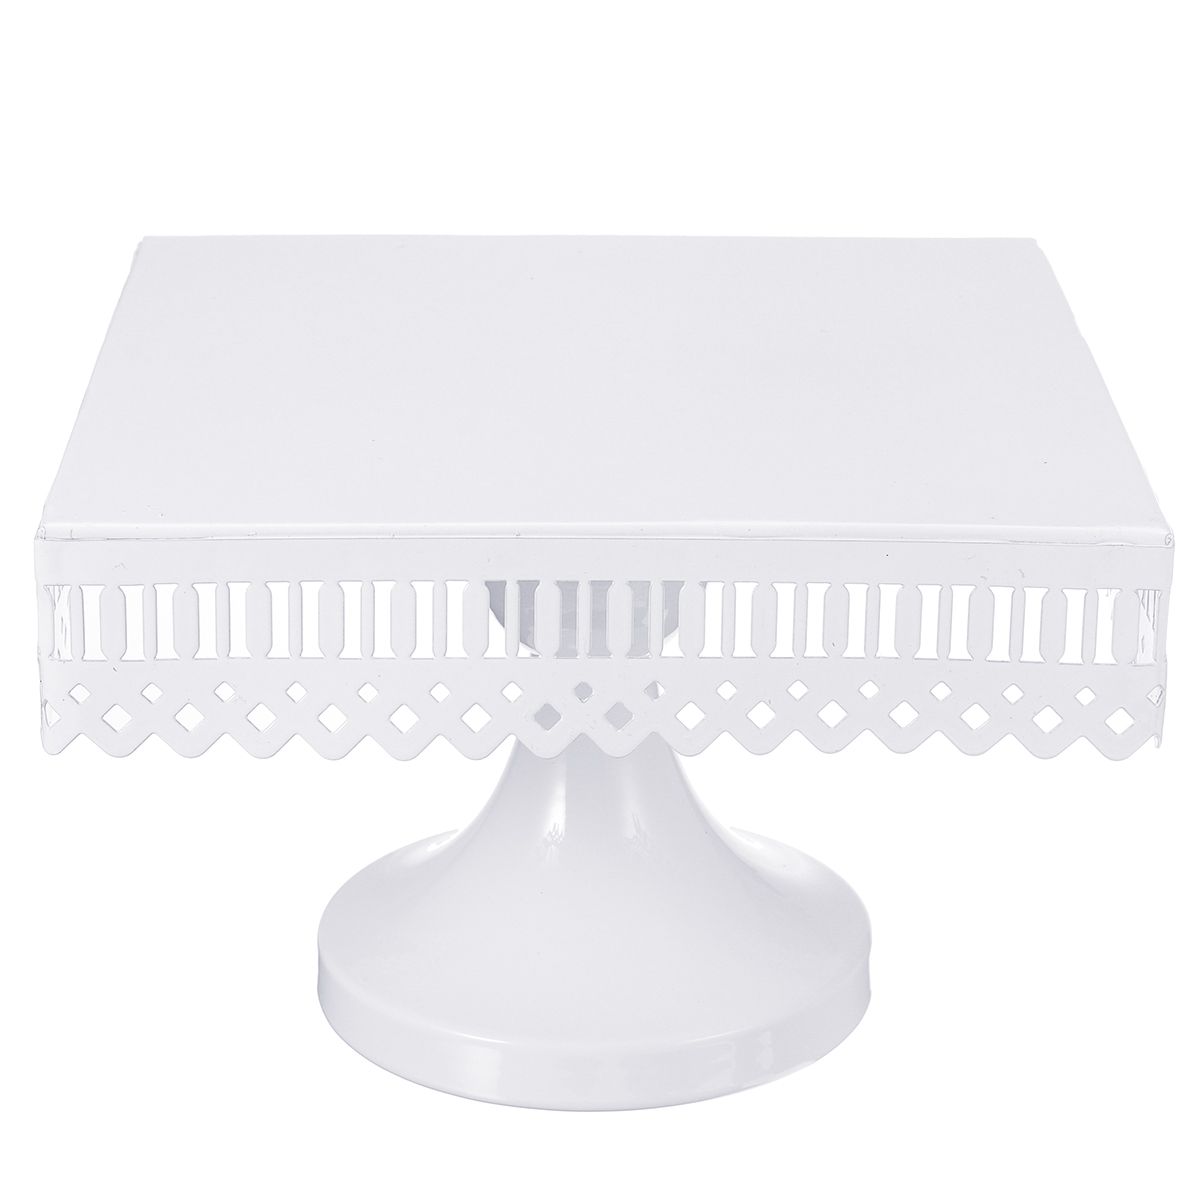 White-Square-Cupcake-Rack-Wedding-Decorations-Cake-Christmas-Display-Lace-Stands-1541735